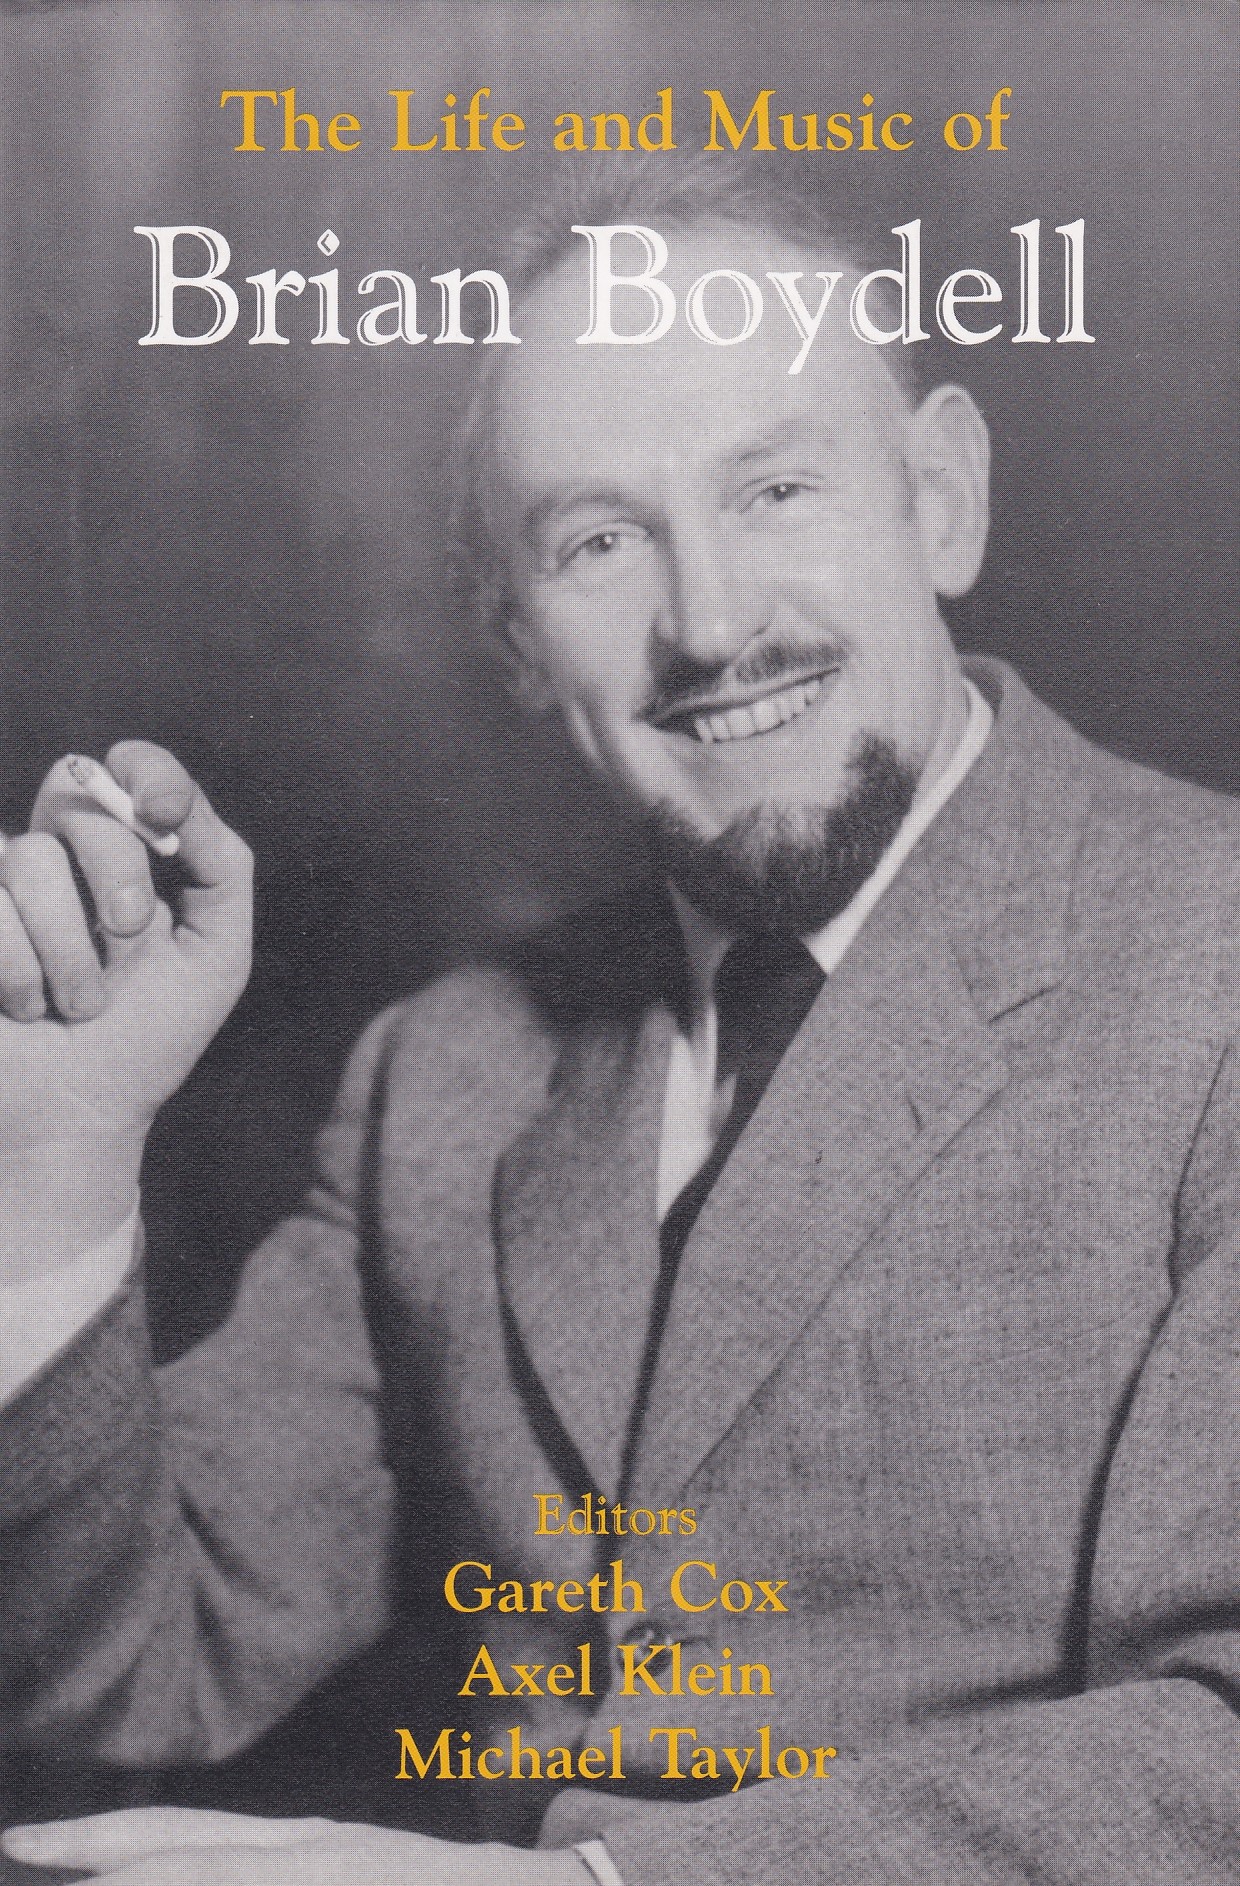 The Life and Music of Brian Boydell by Edited by Gareth Cox, Axel Klein & Michael Taylor